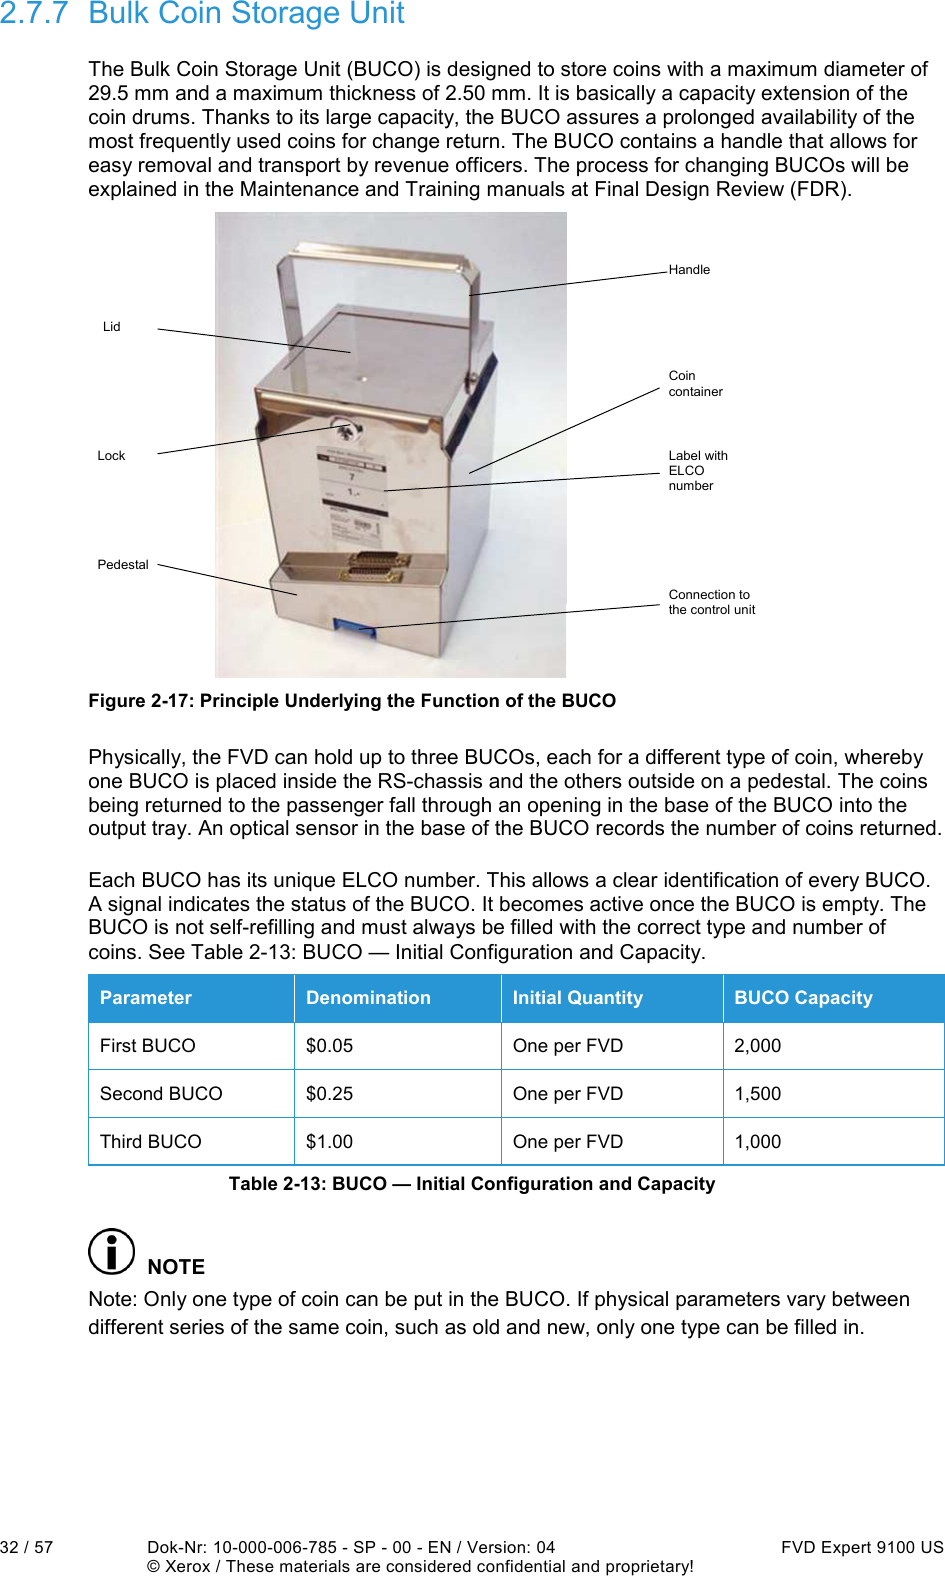  32 / 57  Dok-Nr: 10-000-006-785 - SP - 00 - EN / Version: 04  FVD Expert 9100 US   © Xerox / These materials are considered confidential and proprietary! 2.7.7  Bulk Coin Storage Unit The Bulk Coin Storage Unit (BUCO) is designed to store coins with a maximum diameter of 29.5 mm and a maximum thickness of 2.50 mm. It is basically a capacity extension of the coin drums. Thanks to its large capacity, the BUCO assures a prolonged availability of the most frequently used coins for change return. The BUCO contains a handle that allows for easy removal and transport by revenue officers. The process for changing BUCOs will be explained in the Maintenance and Training manuals at Final Design Review (FDR).  Handle Coin  container Label with ELCO number Connection to the control unit Lid Lock Pedestal  Figure 2-17: Principle Underlying the Function of the BUCO Physically, the FVD can hold up to three BUCOs, each for a different type of coin, whereby one BUCO is placed inside the RS-chassis and the others outside on a pedestal. The coins being returned to the passenger fall through an opening in the base of the BUCO into the output tray. An optical sensor in the base of the BUCO records the number of coins returned. Each BUCO has its unique ELCO number. This allows a clear identification of every BUCO. A signal indicates the status of the BUCO. It becomes active once the BUCO is empty. The BUCO is not self-refilling and must always be filled with the correct type and number of coins. See Table 2-13: BUCO — Initial Configuration and Capacity. Parameter  Denomination  Initial Quantity  BUCO Capacity First BUCO  $0.05  One per FVD  2,000 Second BUCO  $0.25  One per FVD  1,500 Third BUCO  $1.00  One per FVD  1,000 Table 2-13: BUCO — Initial Configuration and Capacity  NOTE Note: Only one type of coin can be put in the BUCO. If physical parameters vary between different series of the same coin, such as old and new, only one type can be filled in. 